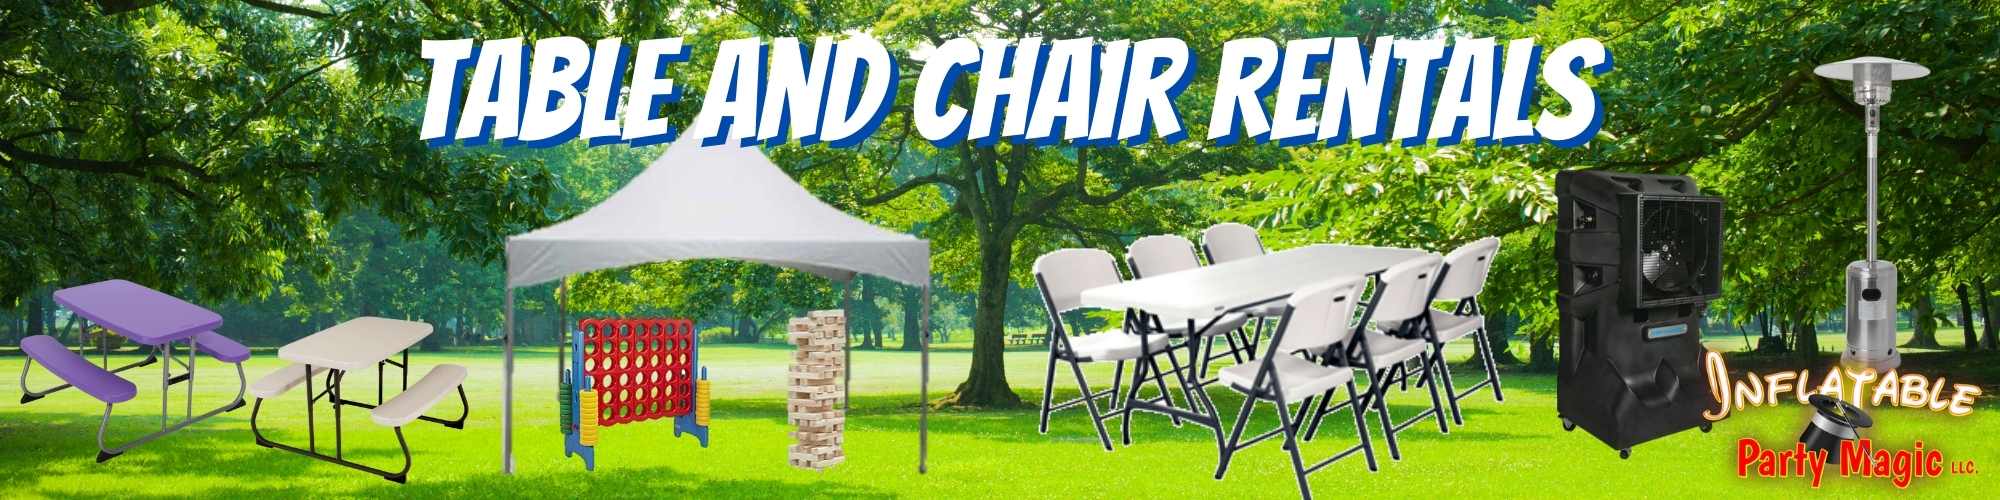 Table and Chair Rentals in DFW Texas near me